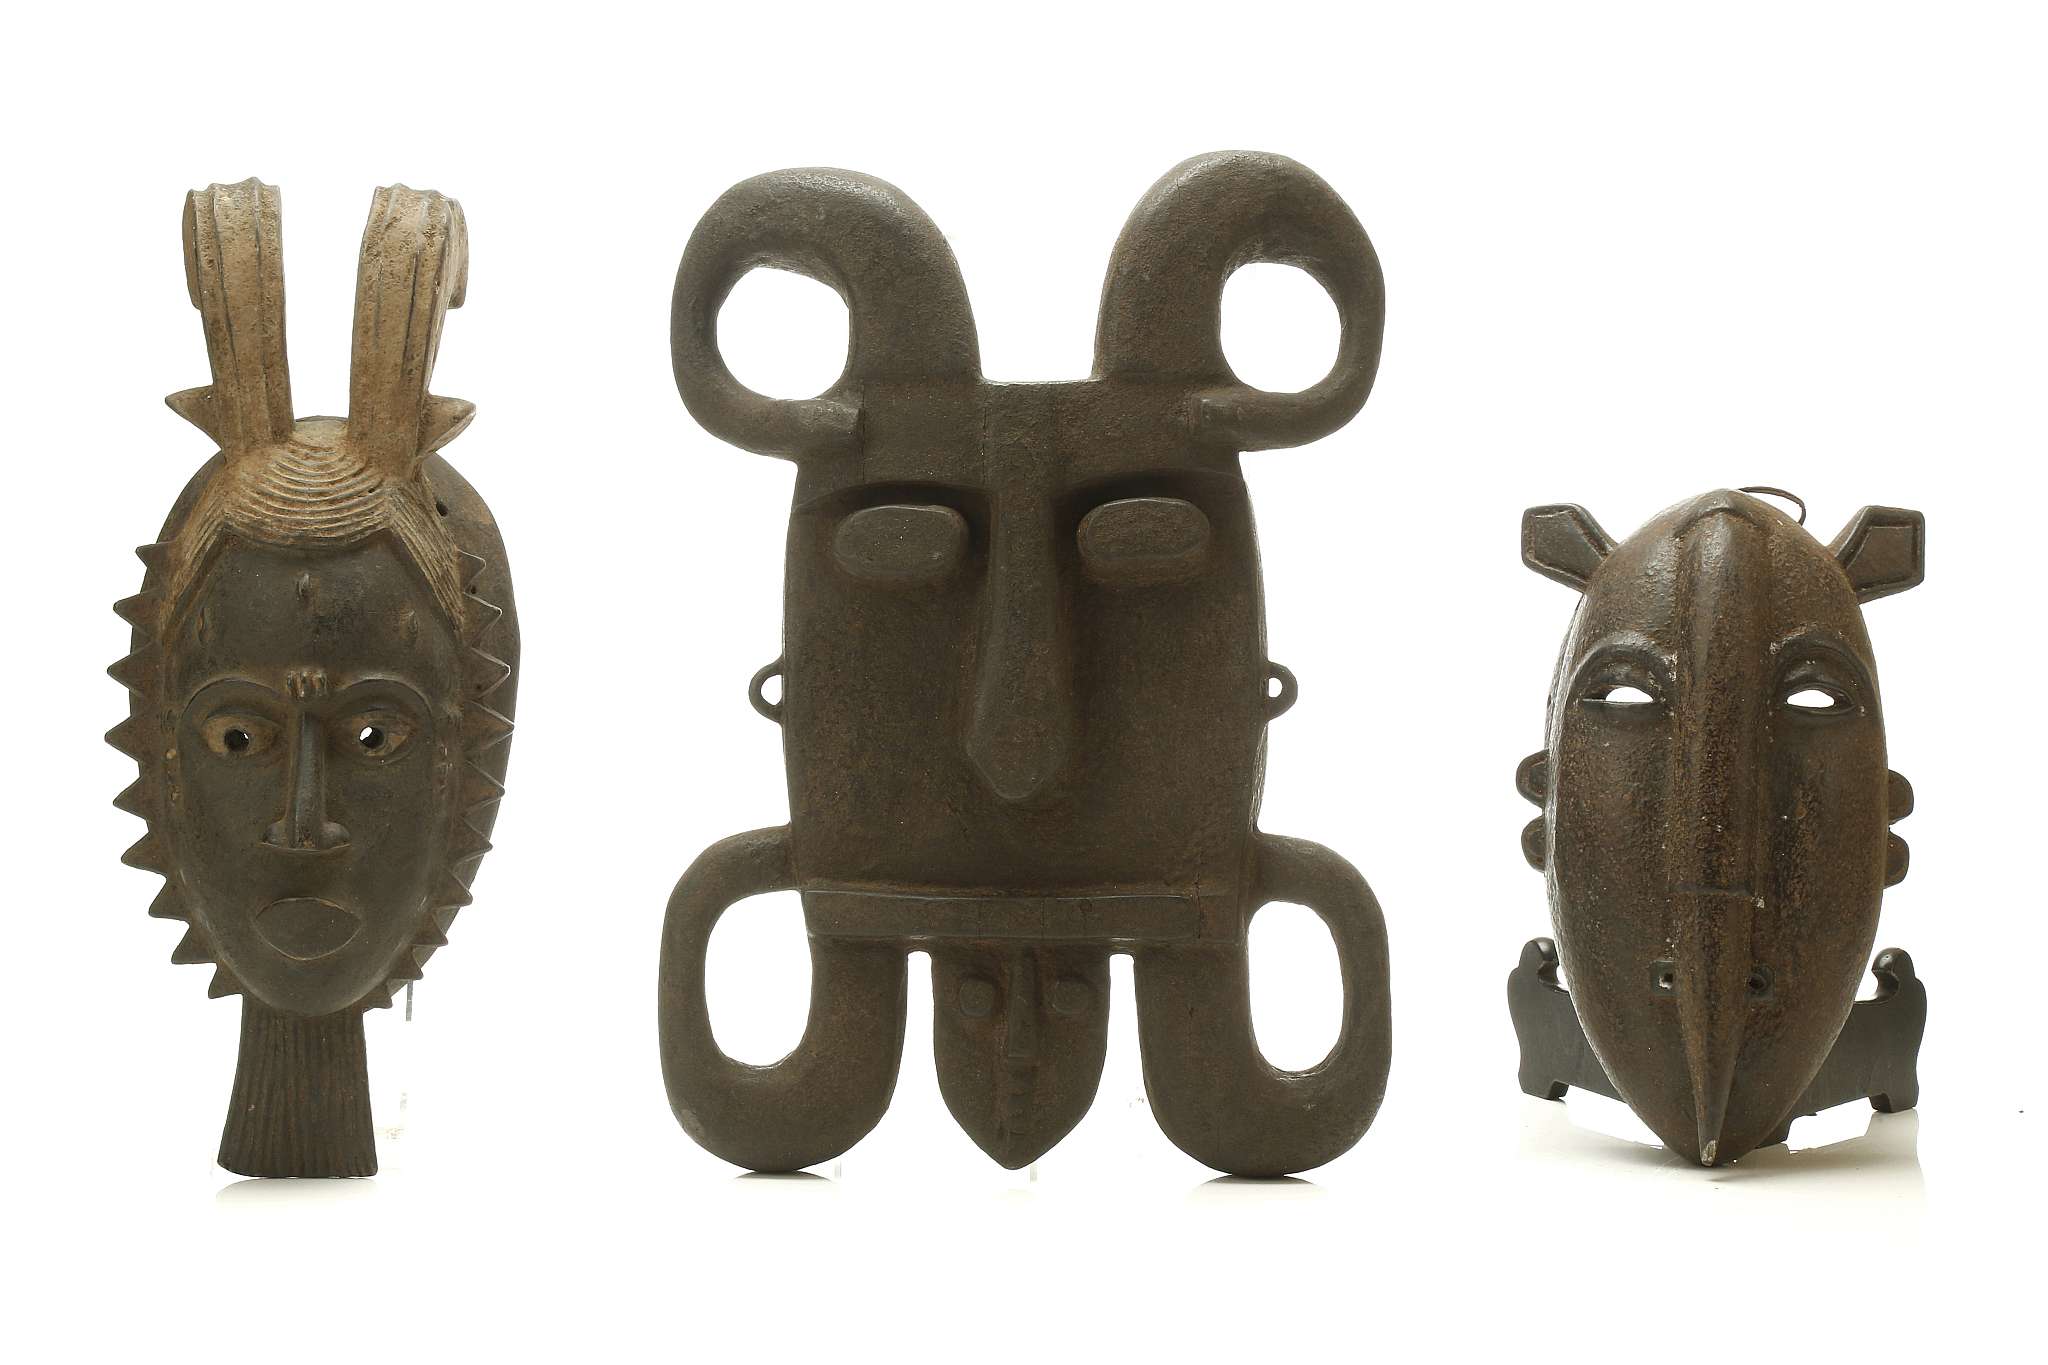 AN WOODEN IJAW MASK, NIGERIA, AND TWO WOODEN MASKS, IVORY COAST The Ijaw mask square in form with